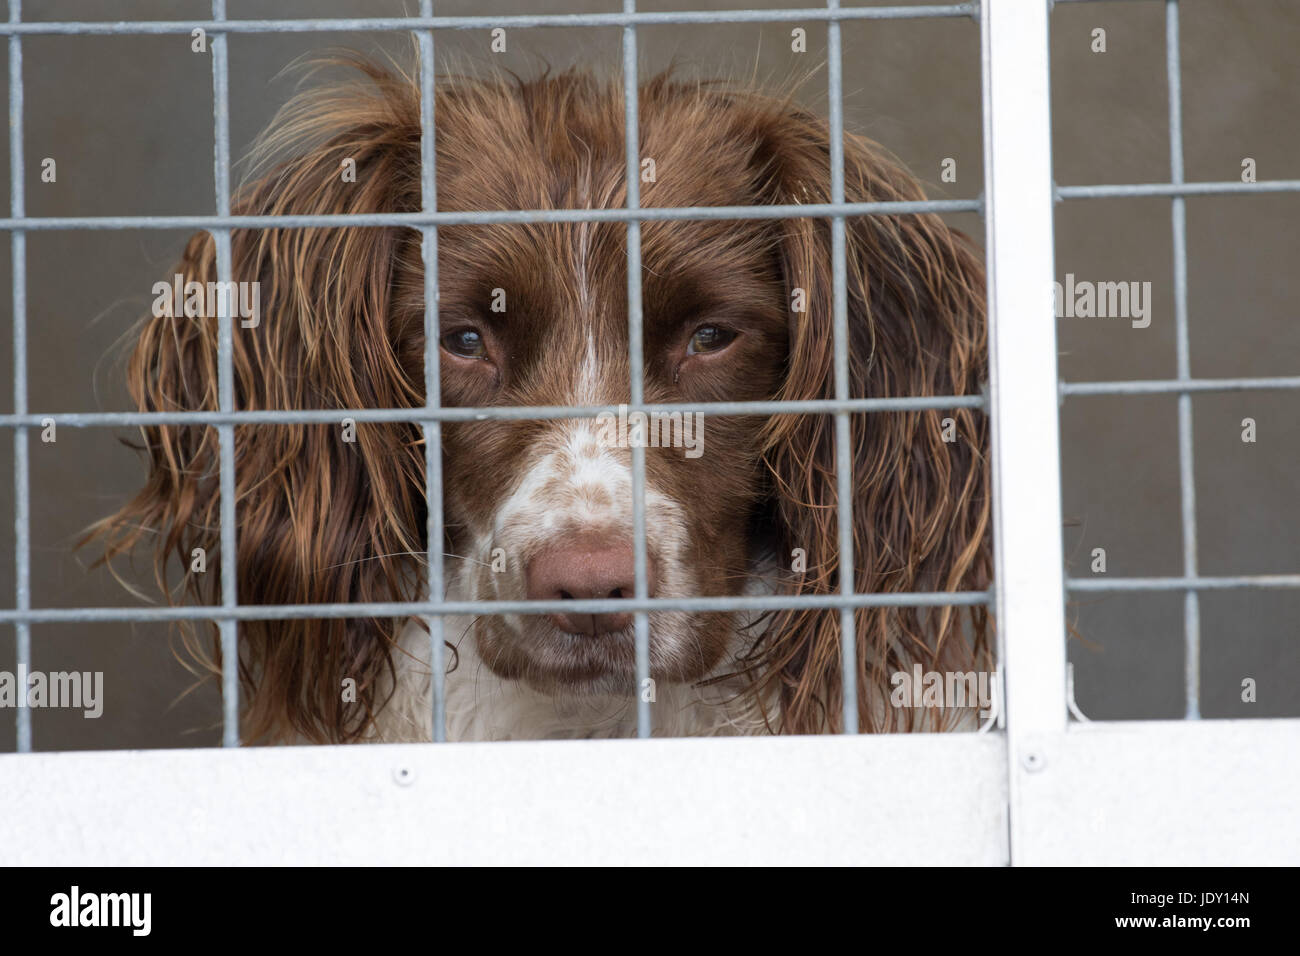 Kennel Uk High Resolution Stock Photography and Images - Alamy